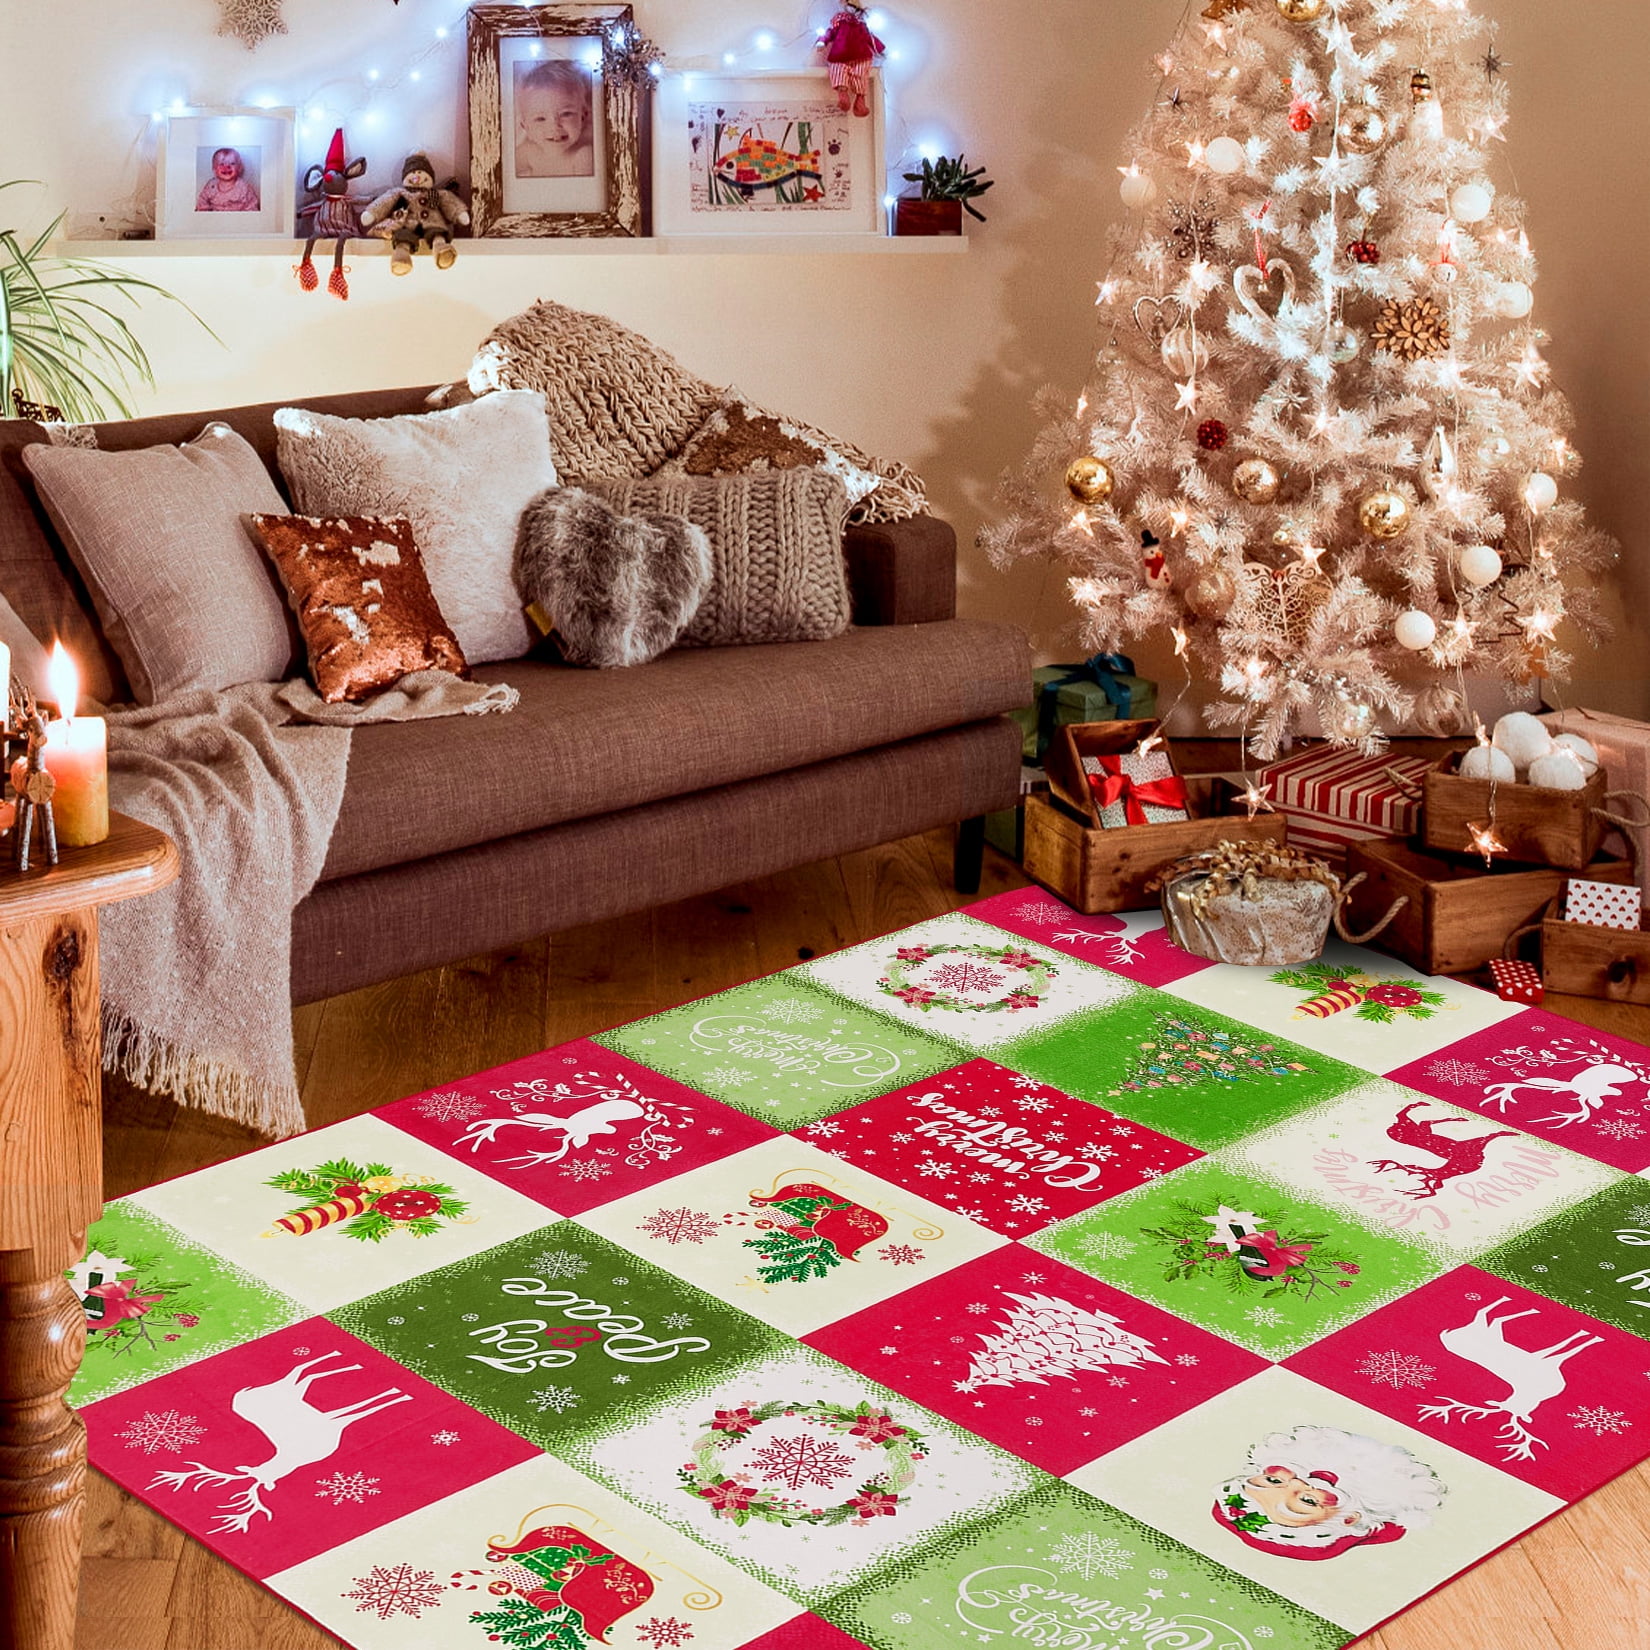 Christmas Rugs 3x4 Rug Tiger Entryway Area Rug, Xmas Door Mat Washable  Non-Slip Soft Low Pile Small Carpet, Holiday Decor Rug for Bedroom Living  Room